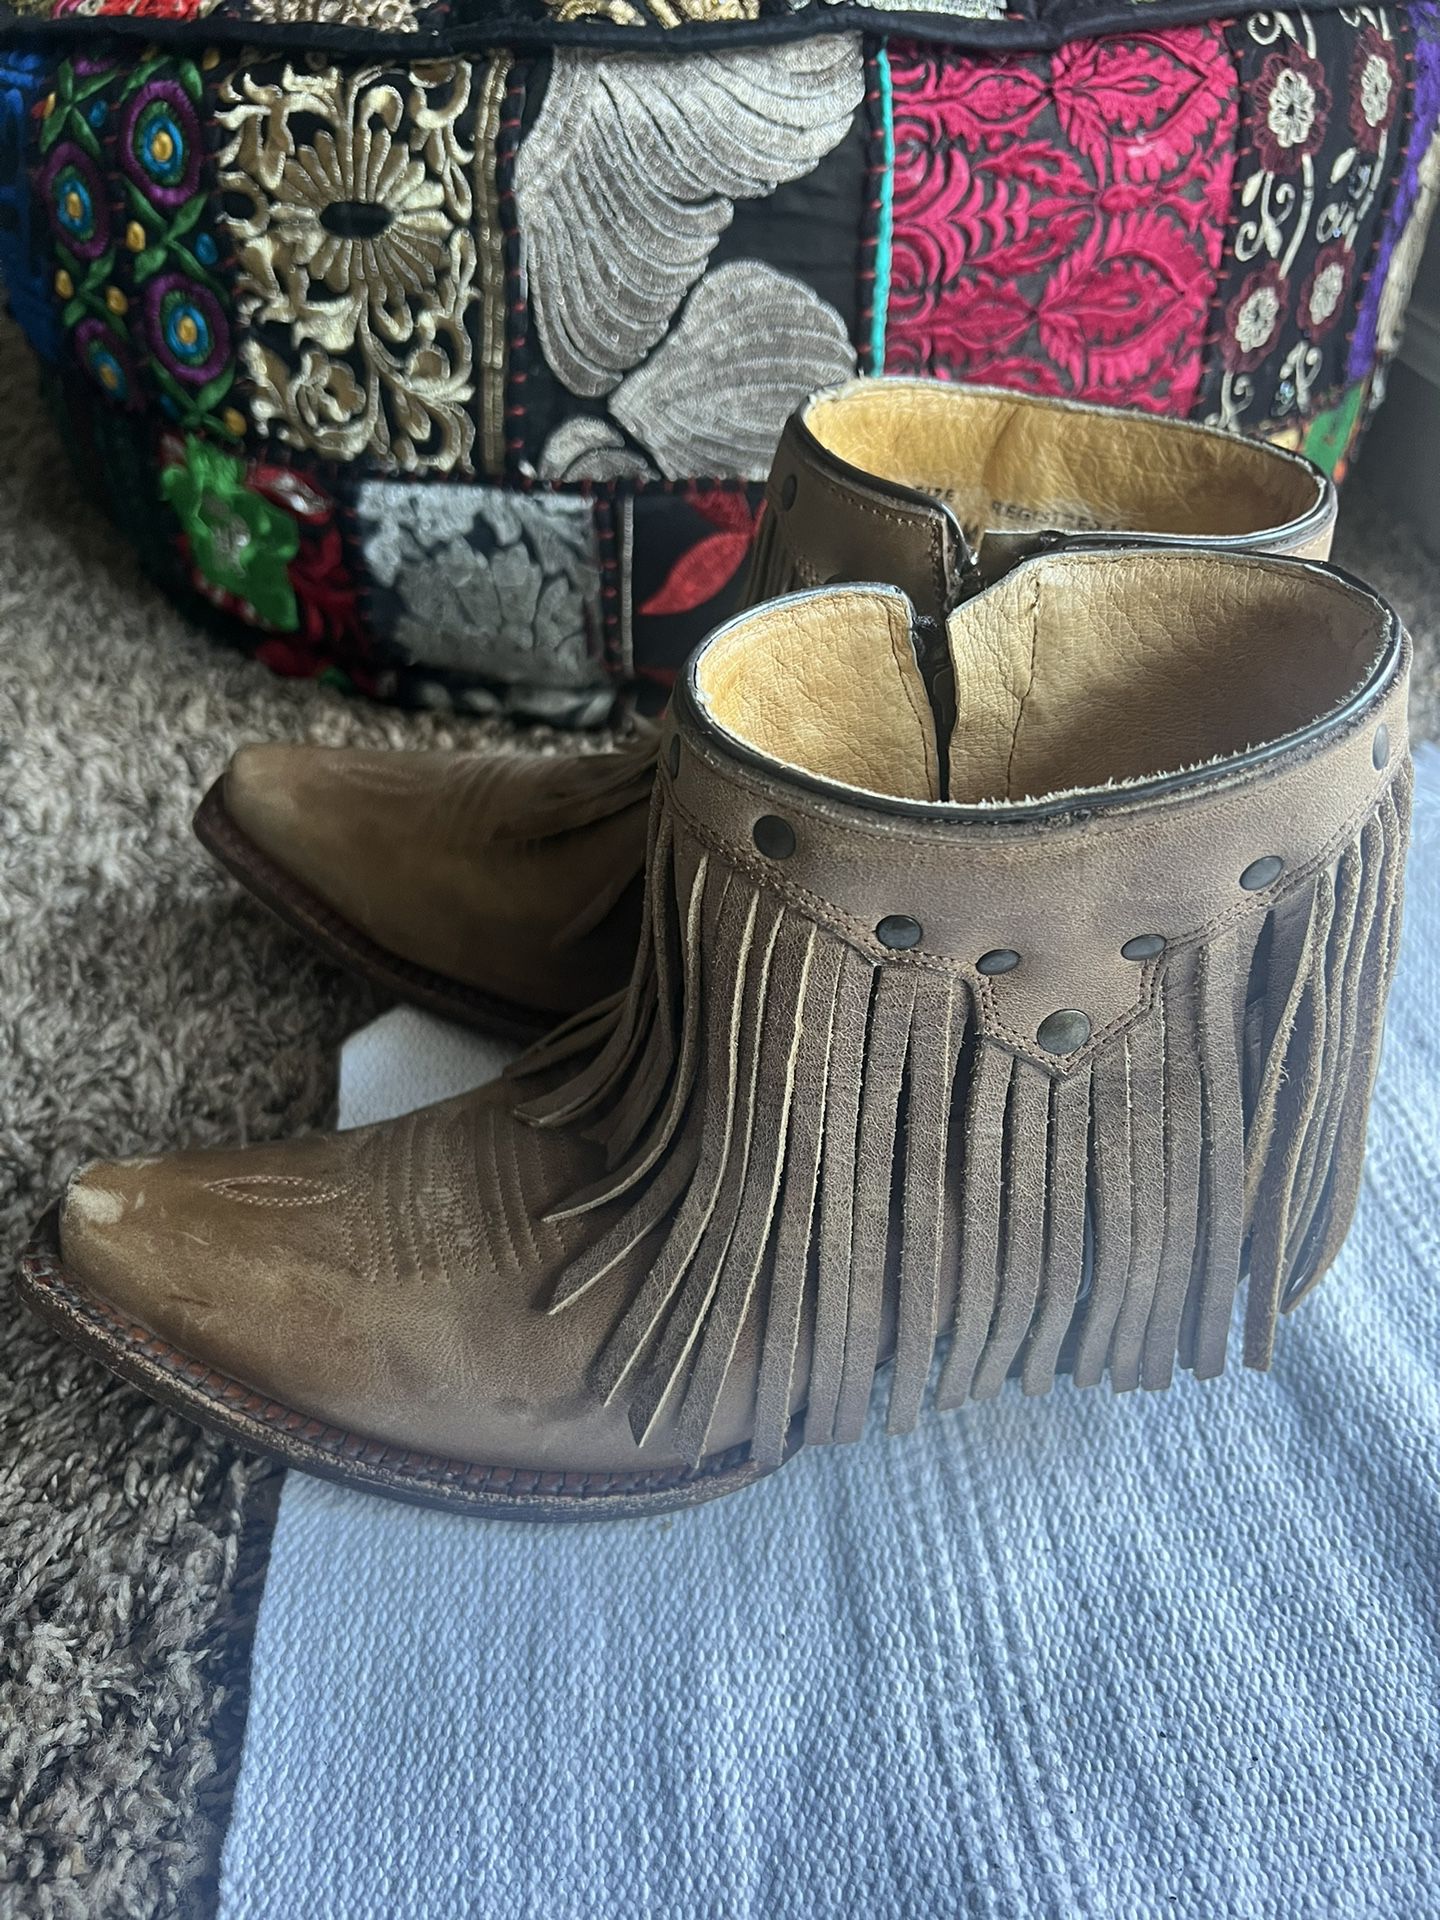 Women’s Light Brown Cowboy Boots Ankle Boot 8.5 